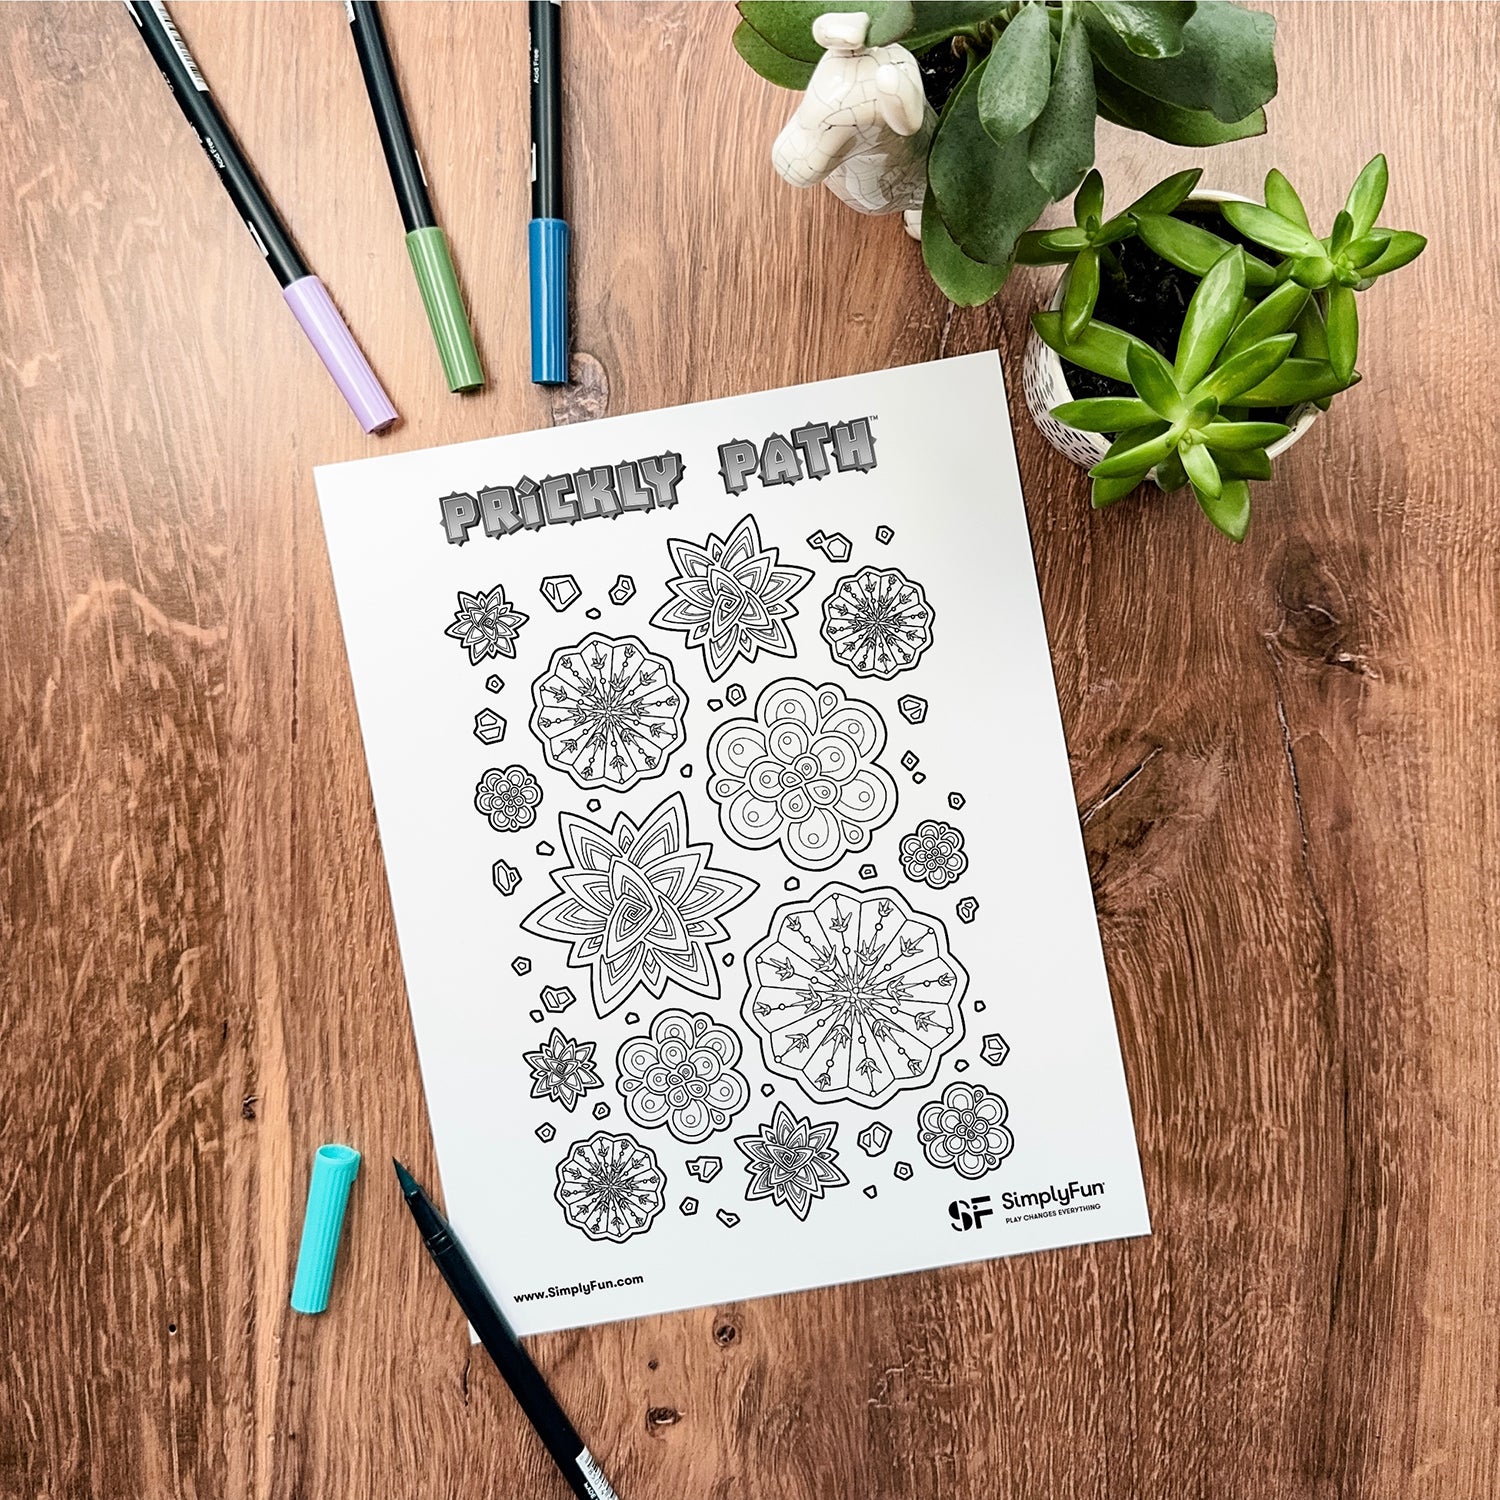 Download this free Prickly Path succulent coloring page from SimplyFun